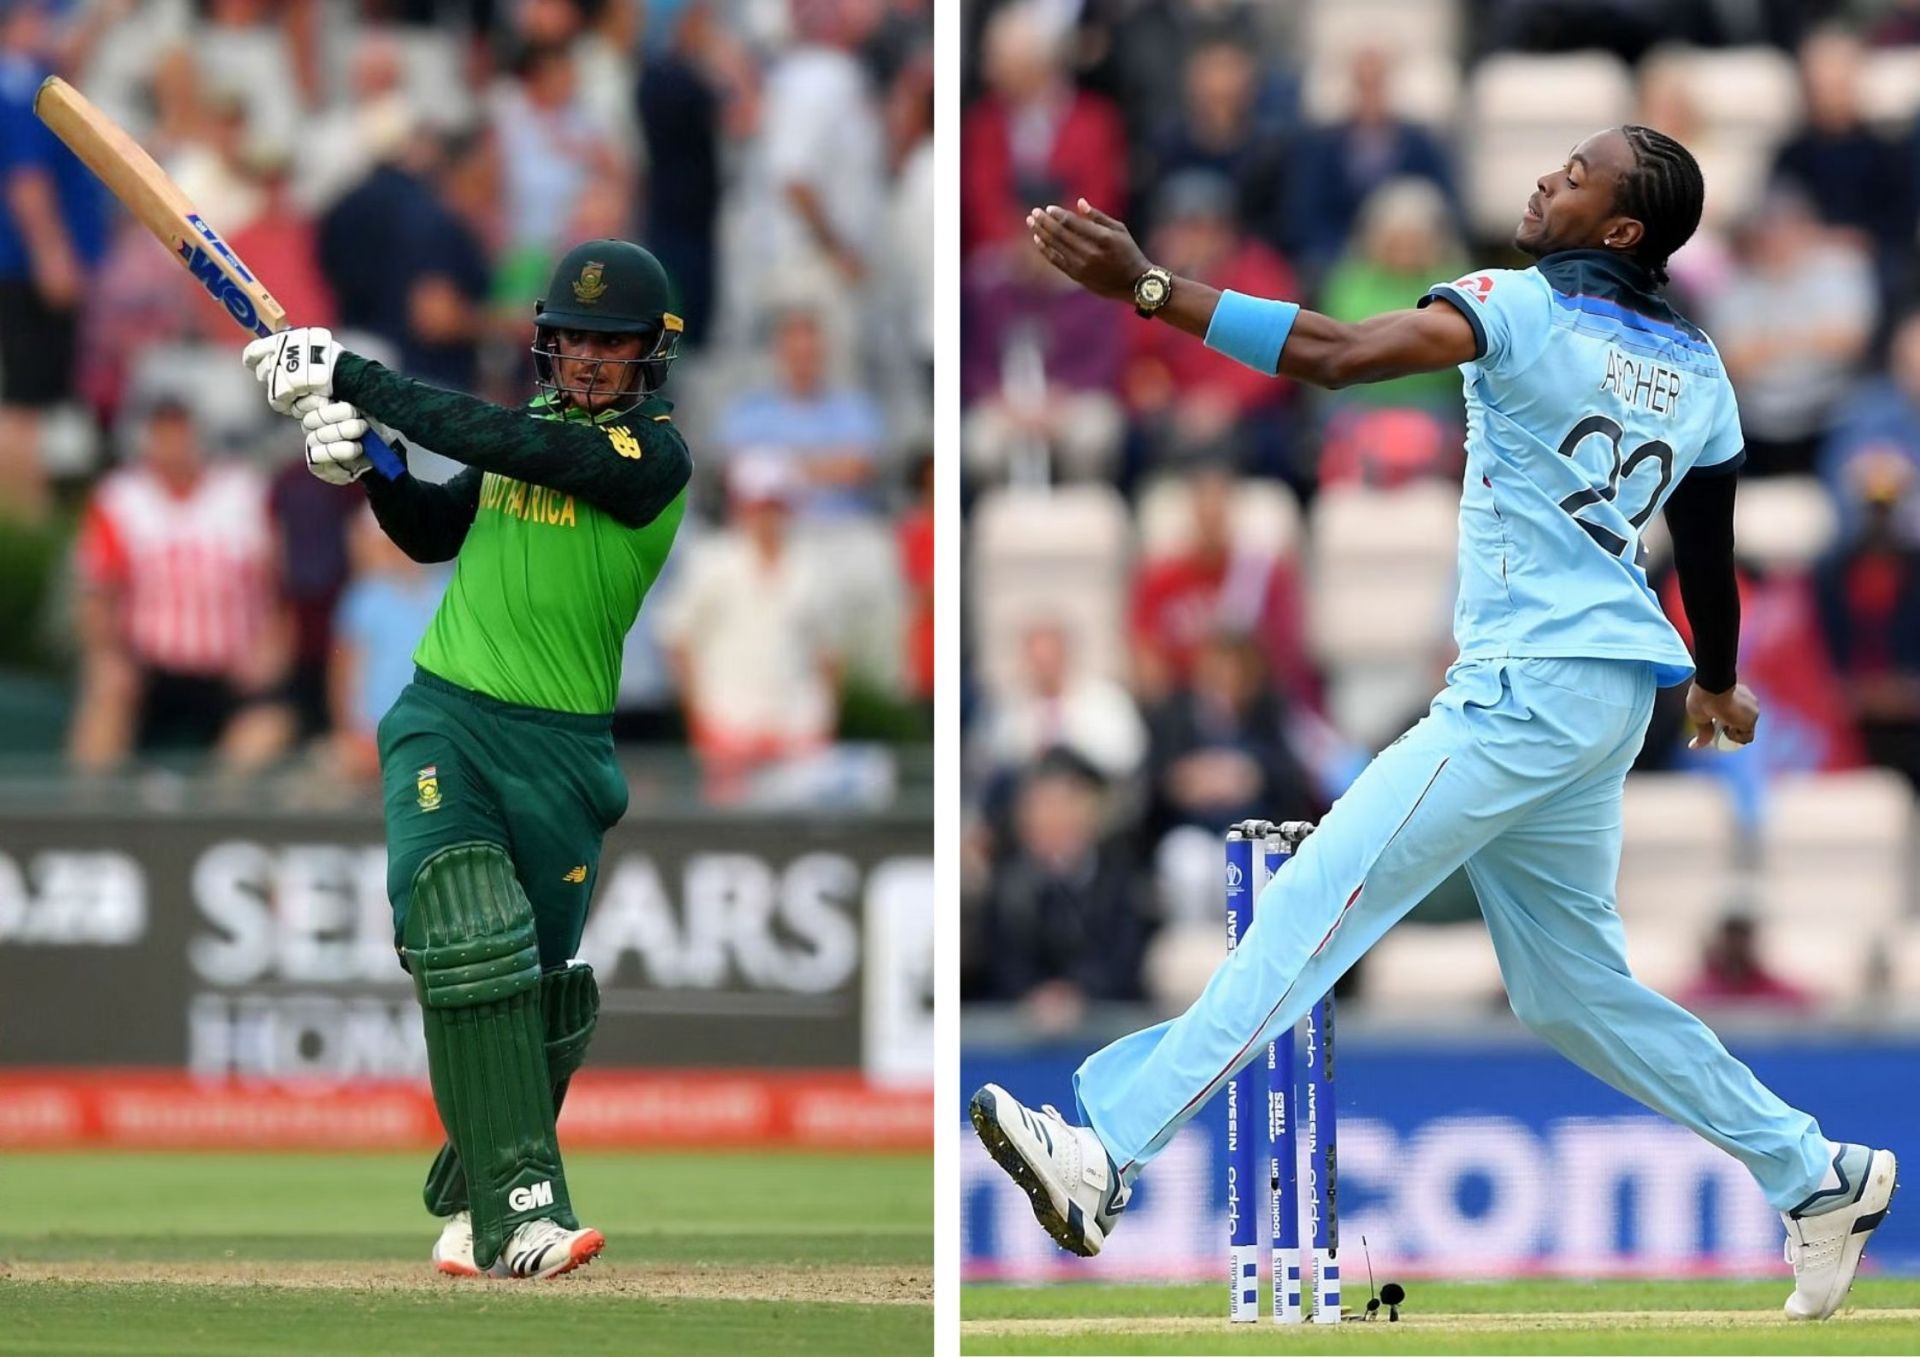 The hard-hitting Quinton de Kock against the fiery Jofra Archer - ought to be a thrill when South Africa and England lock horns!